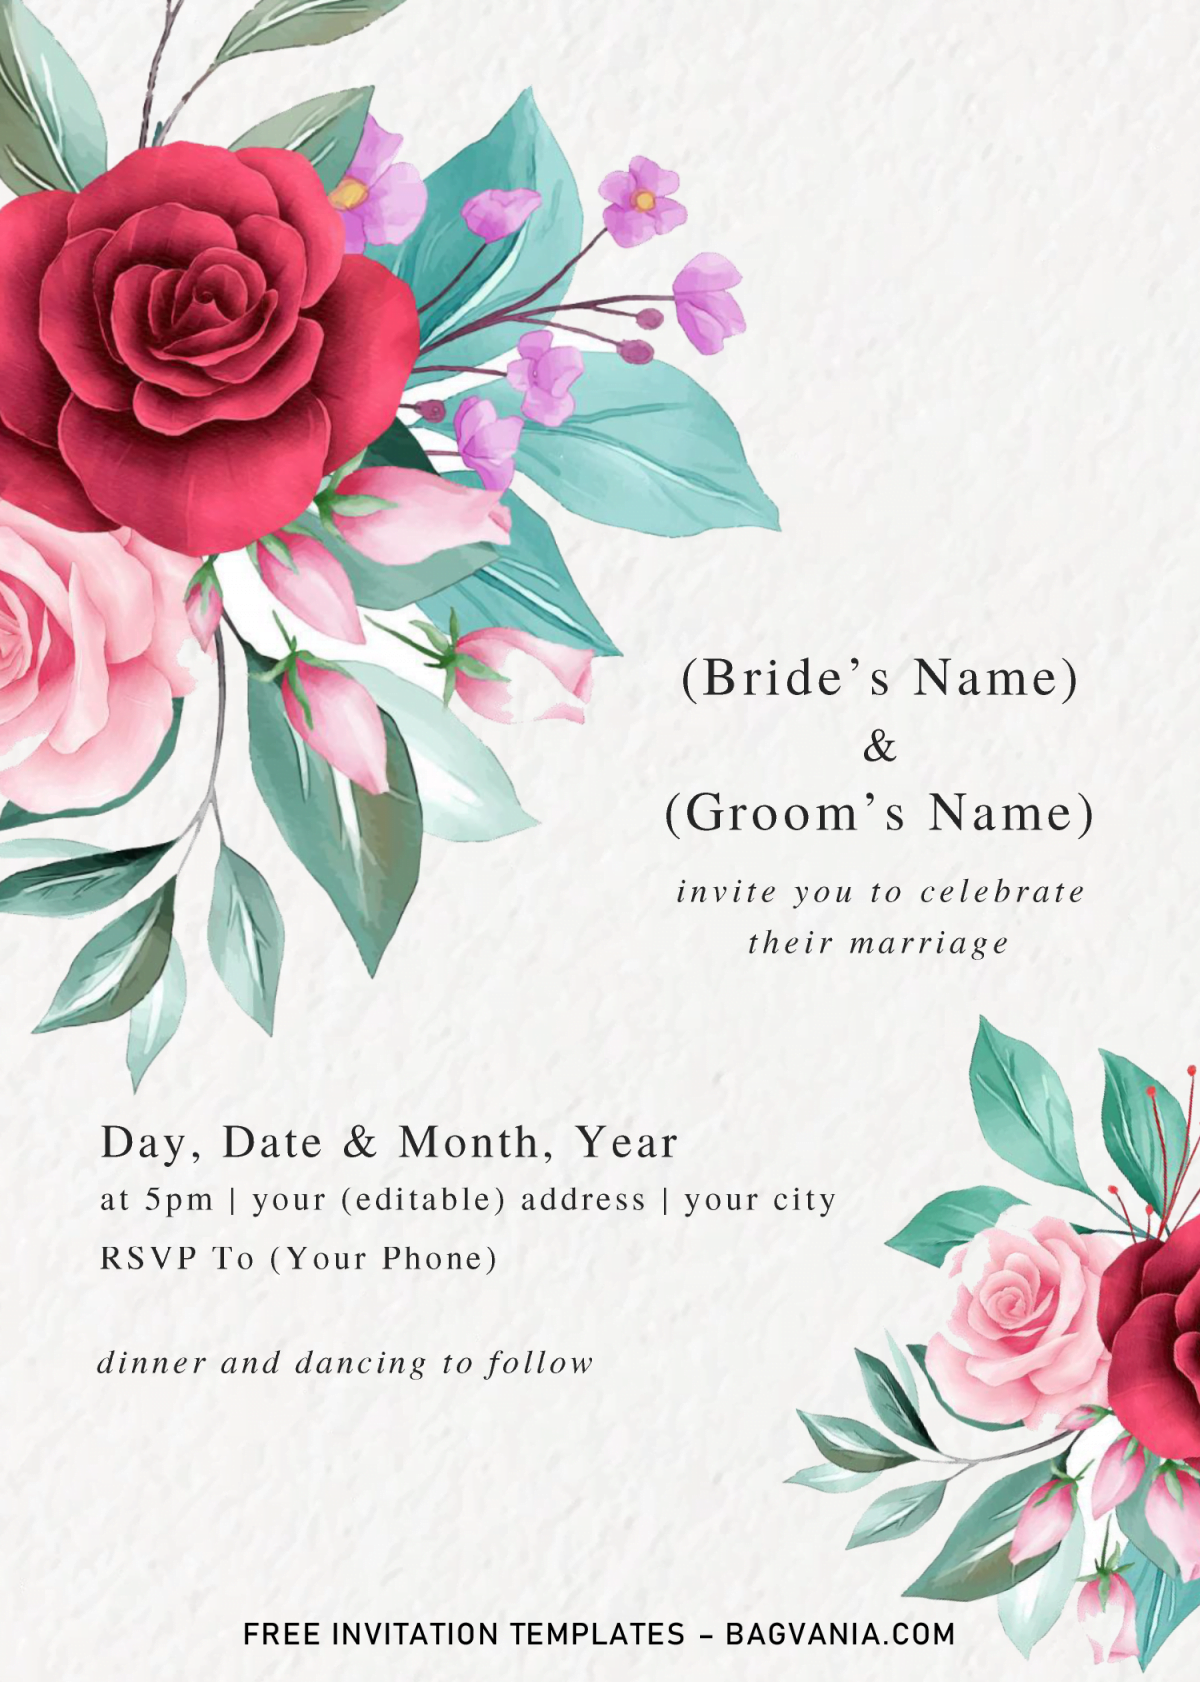 Floral And Greenery Invitation Templates - Editable With Microsoft Word and has portrait orientation design